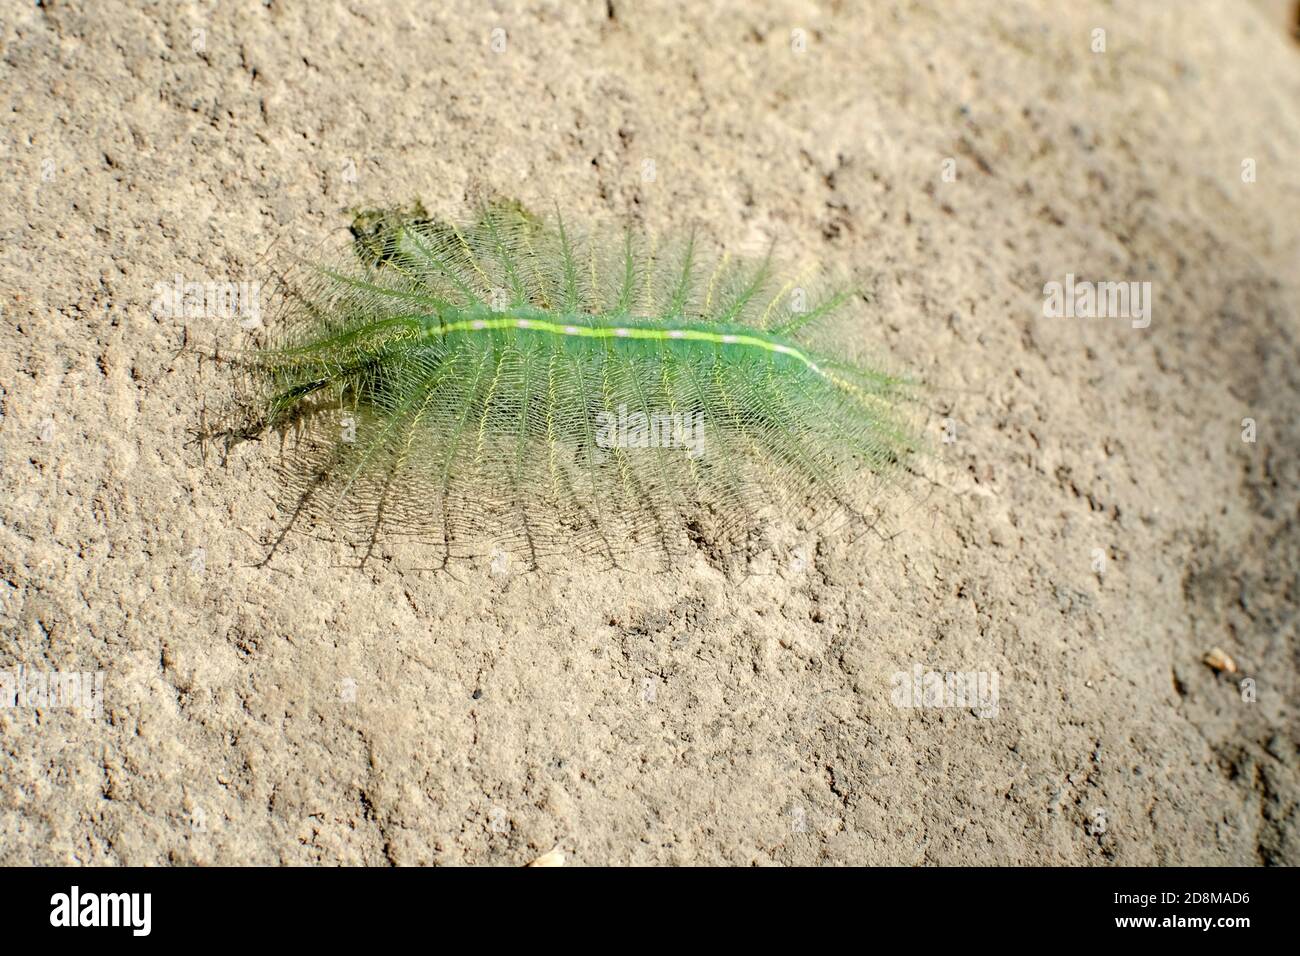 The Common Baron Caterpillar Species: Euthalia Aconthea Order: Lepidoptera . A single common Baron caterpillar hatches from underneath a leaf, as this Stock Photo